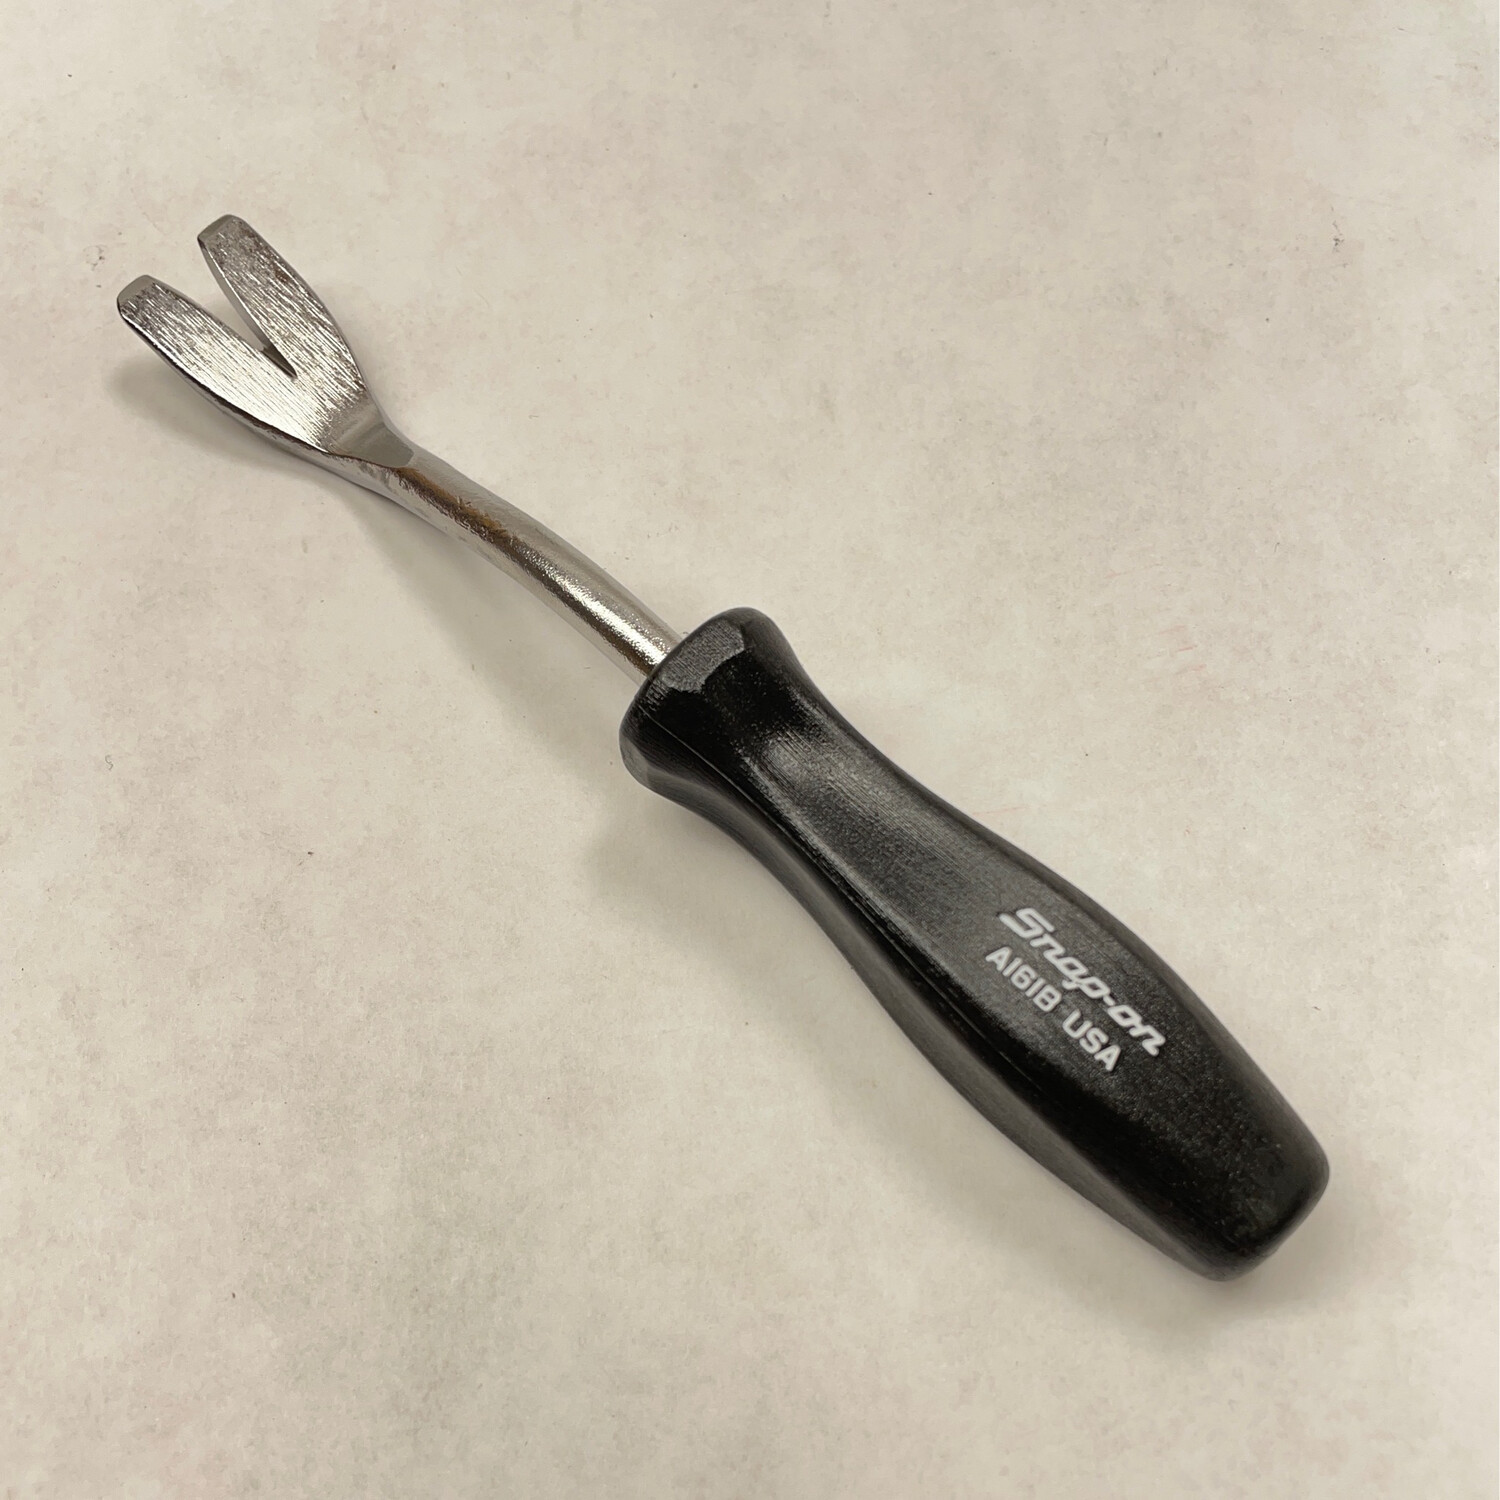 New Snap On Hard Handle Trim Removal Tool, A161B